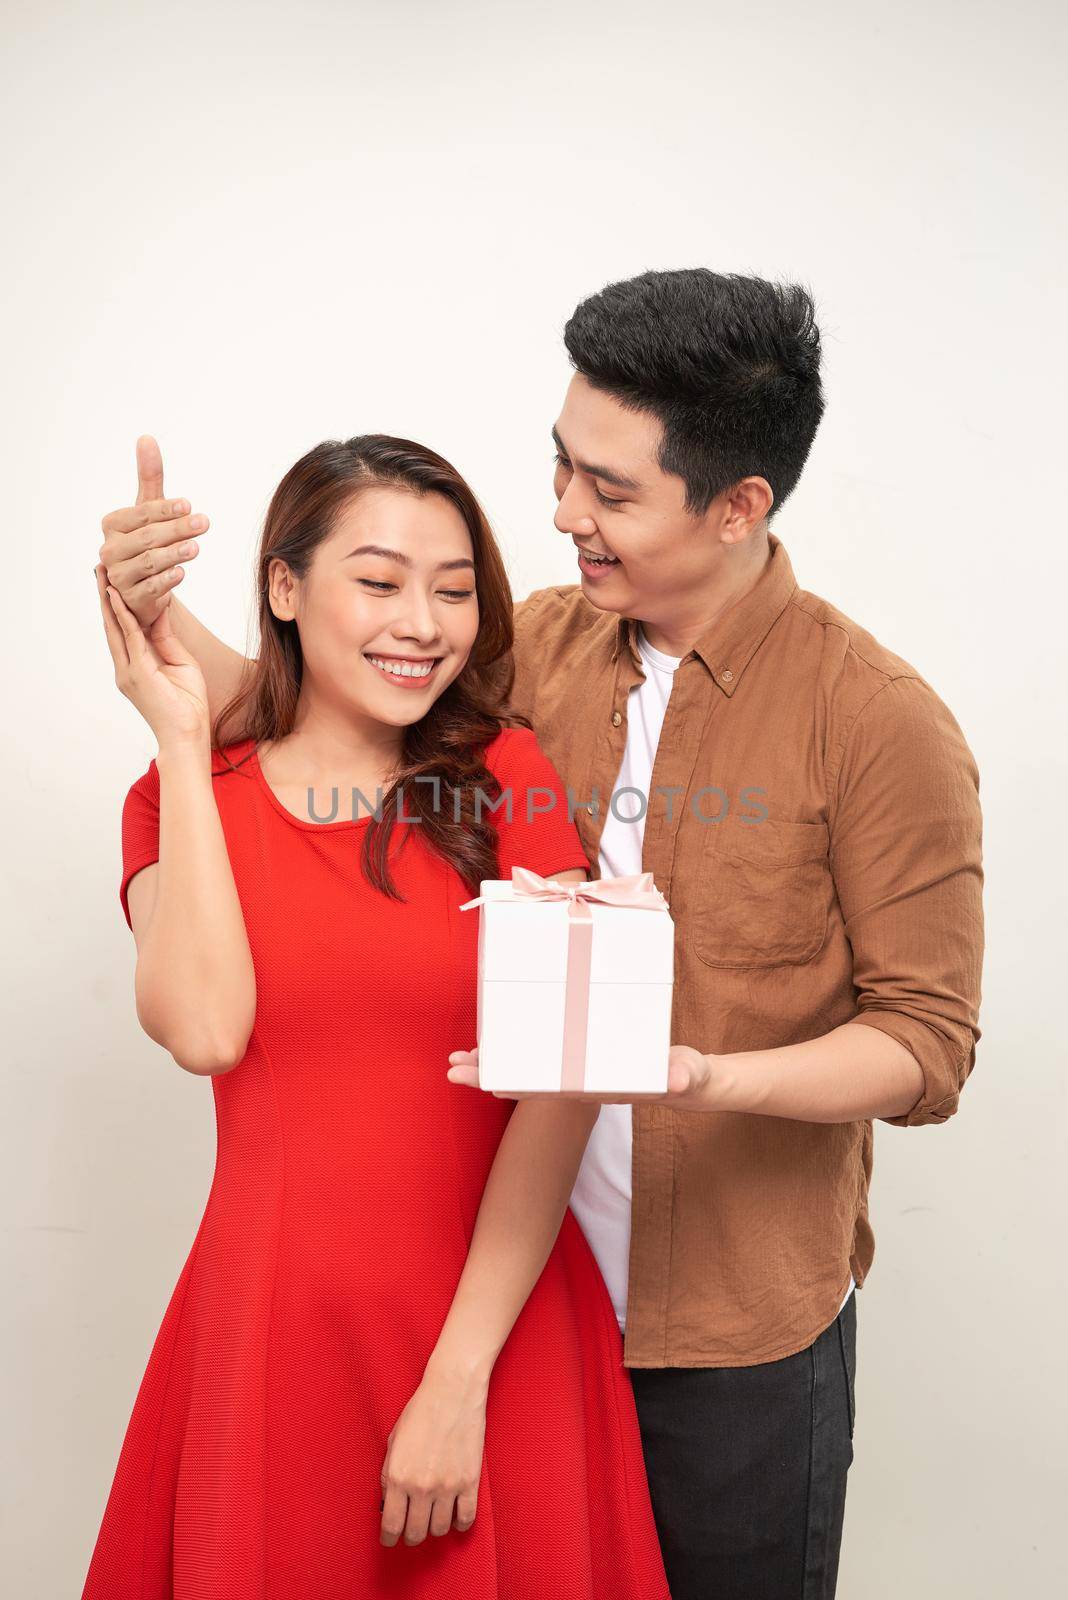 Attractive lovely young couple in love standing together isolated over white background, giving presents, celebrating event